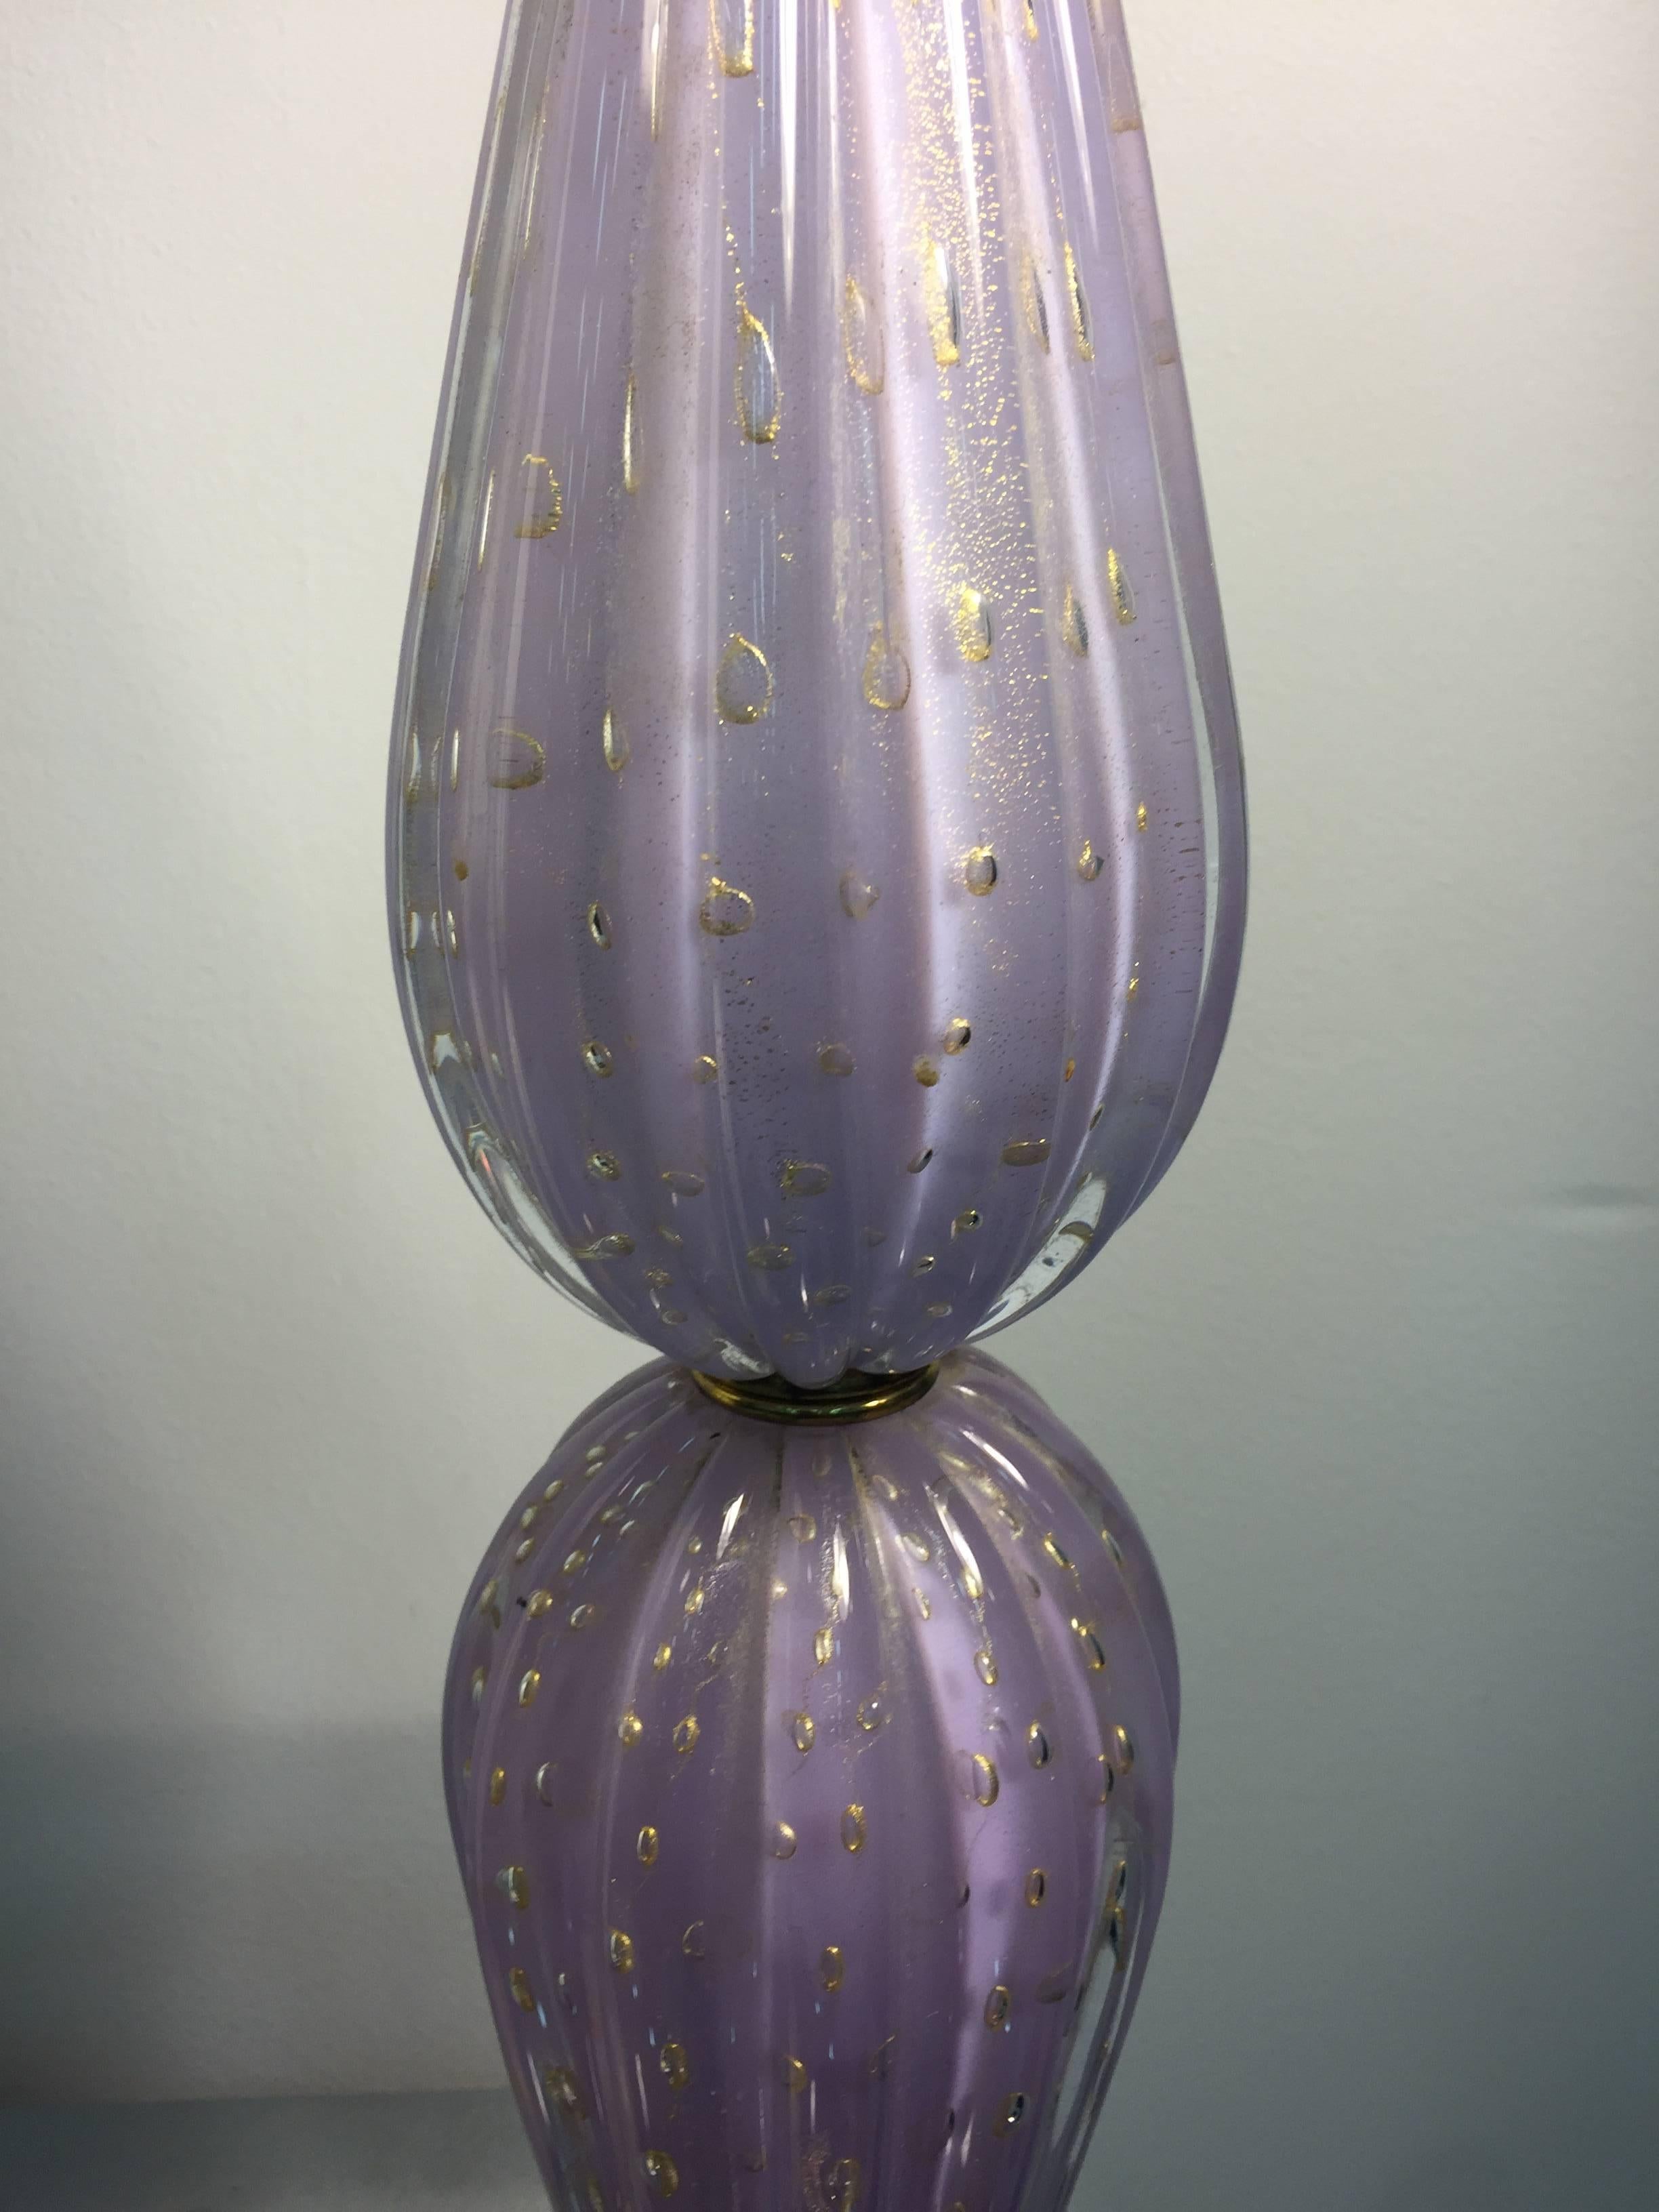 Two terrific table lamps by Barovier & Toso, circa 1960. One lamp is white and the other is purple each with bullicante bubbles and gold inclusions.